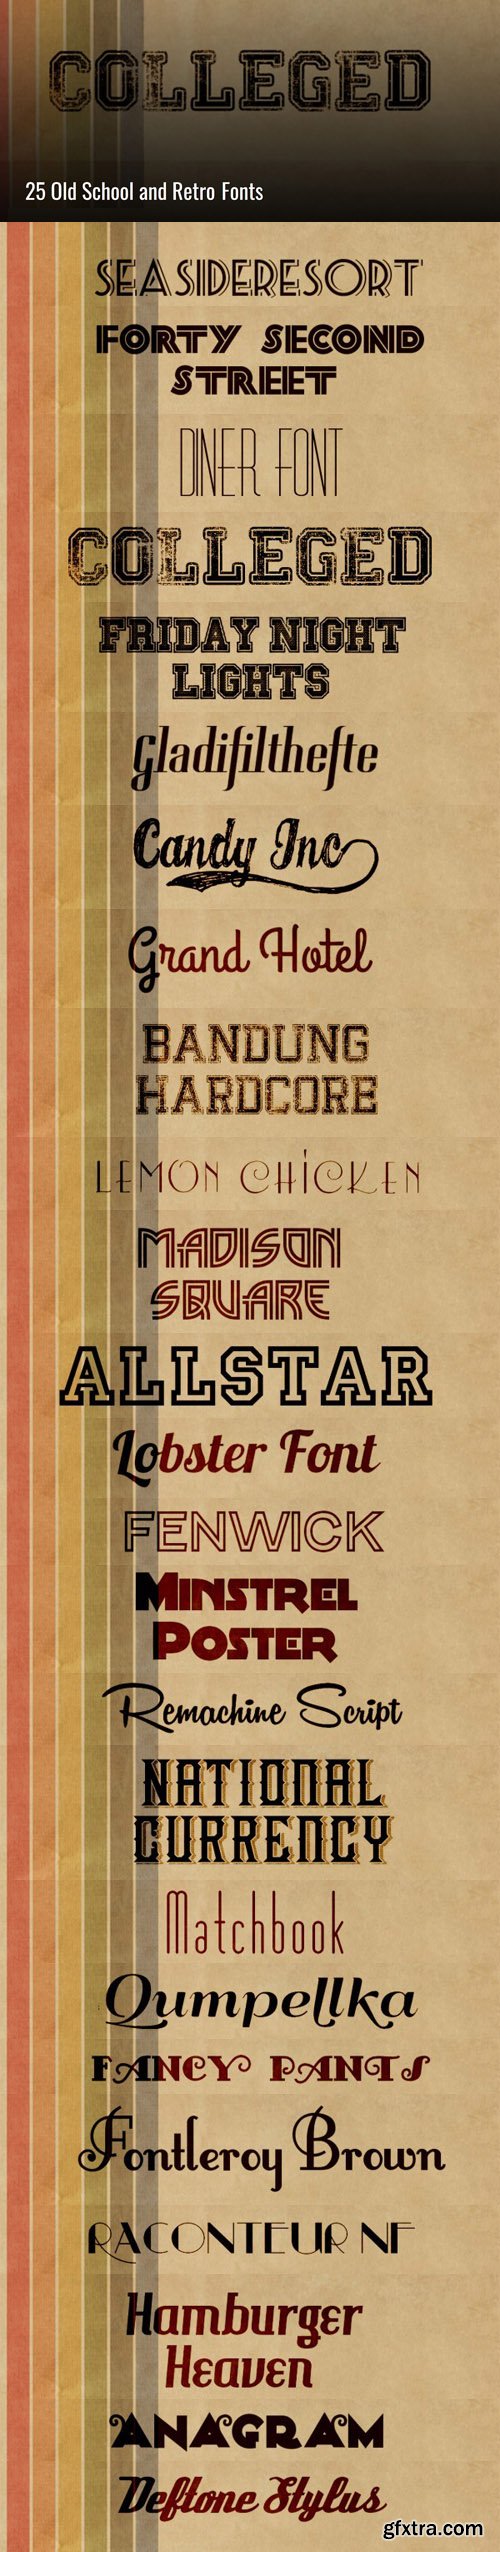 25 Old School & Retro Fonts Collection